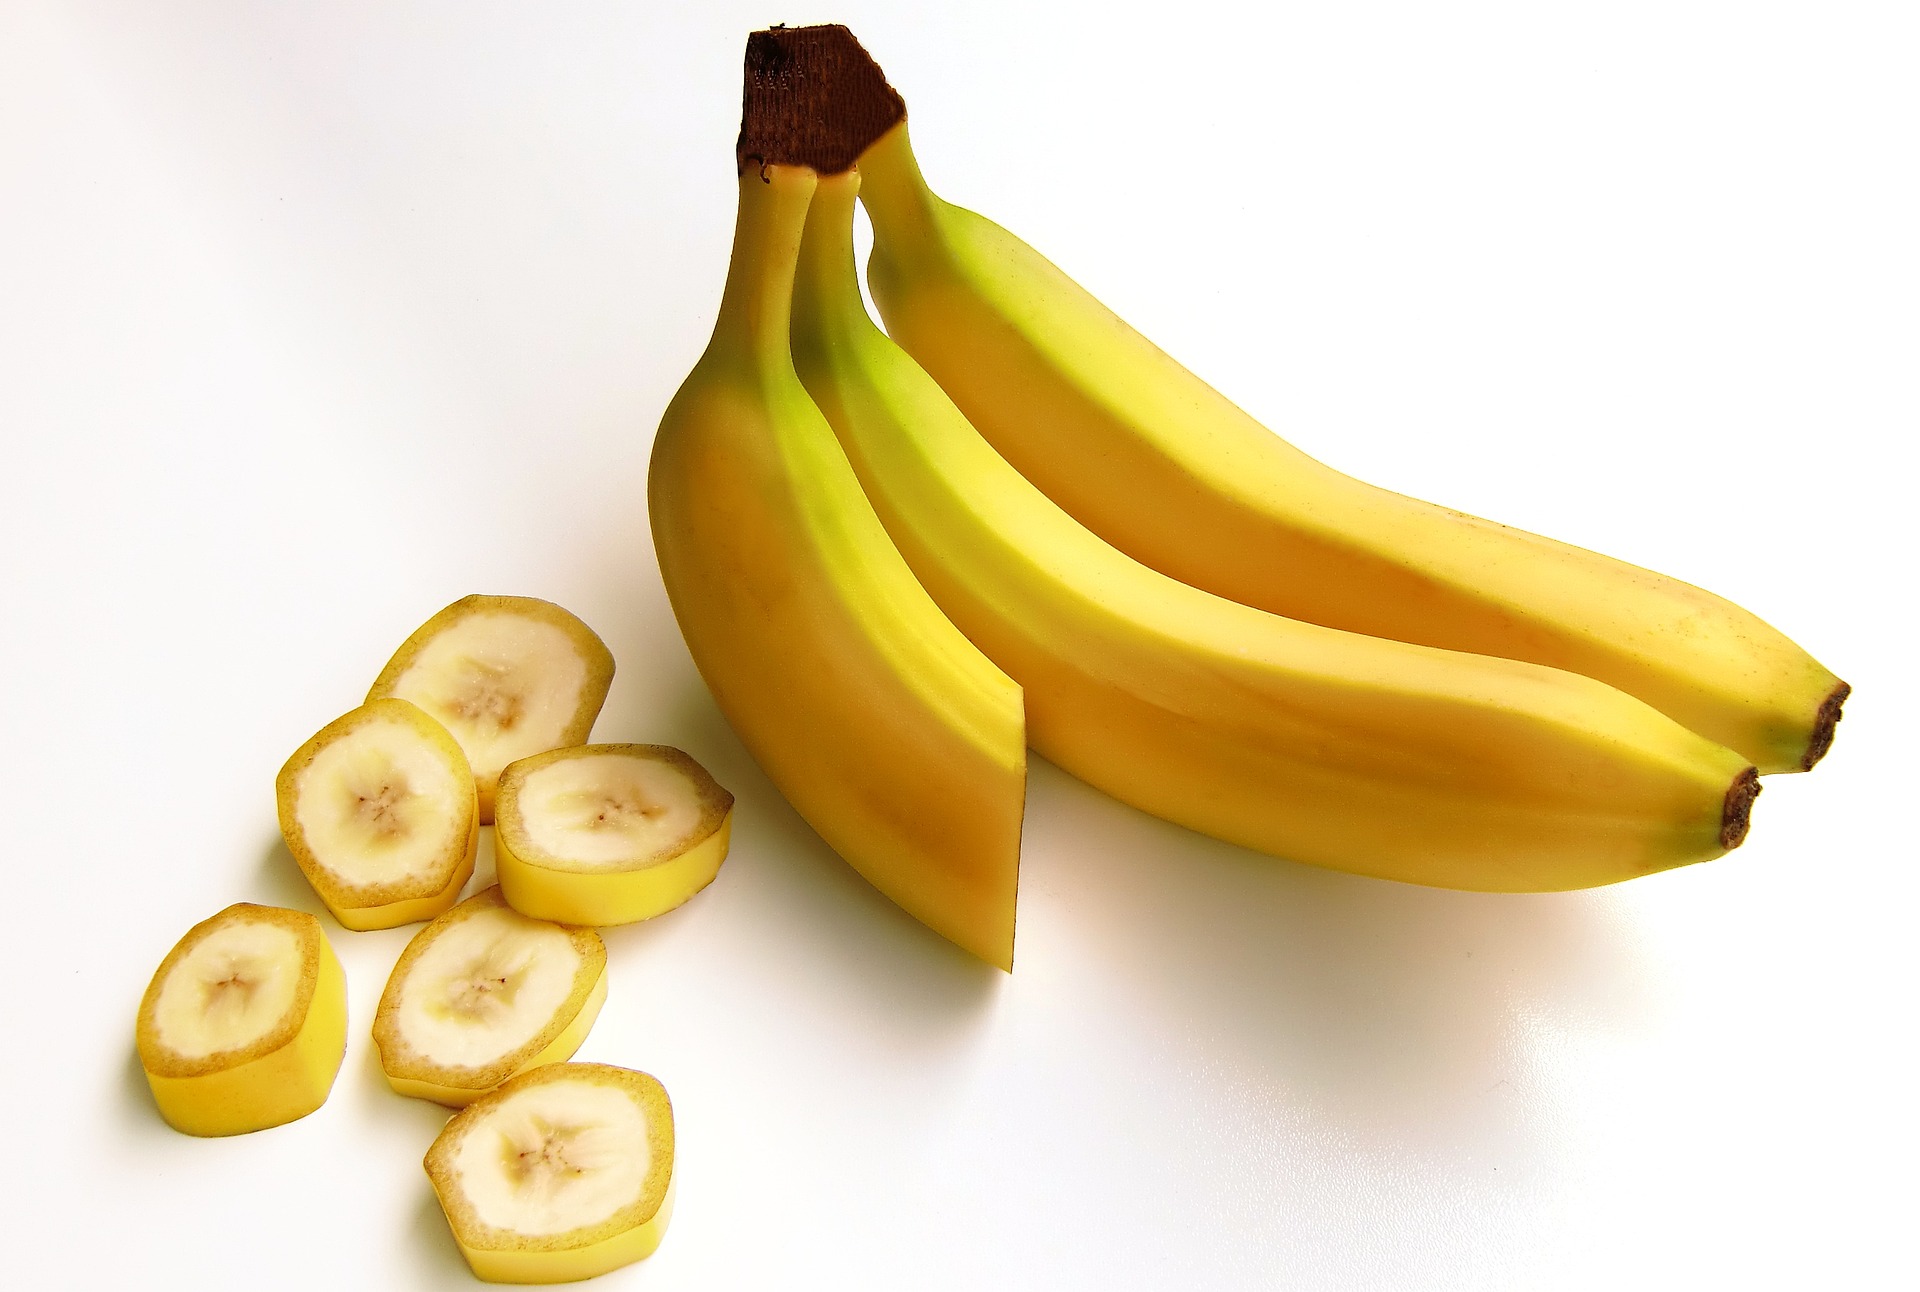 A bunch of bananas, with one cut in half, with the cut up pieces next to them; our Banana allergy Compensation solicitors can assist with making a claim if you have suffered from a banana allergic reaction due to no fault of your own.